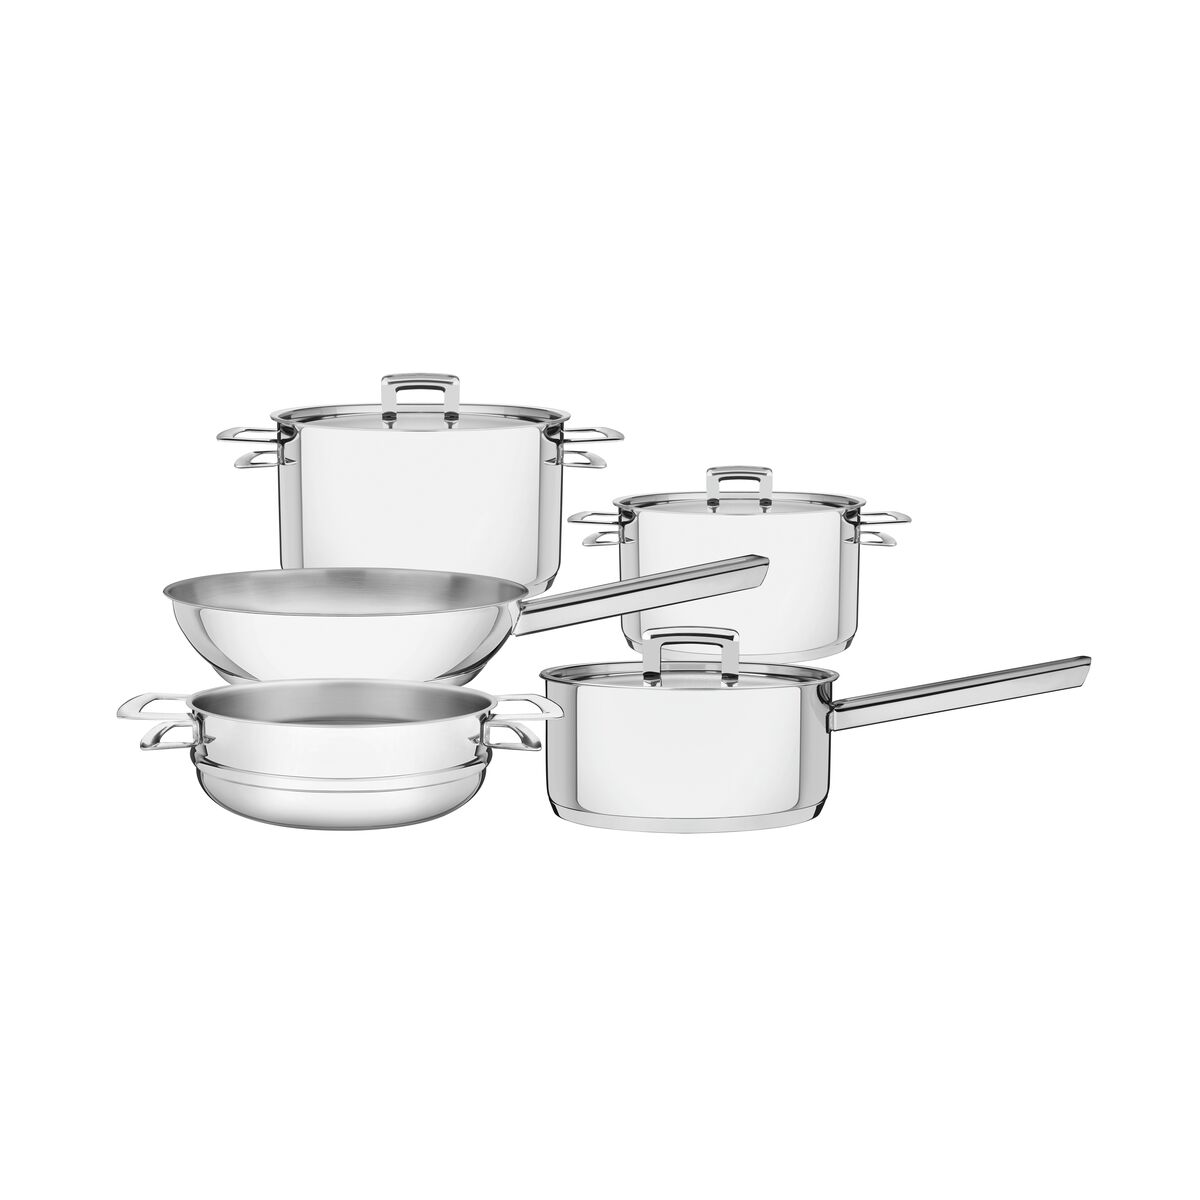 Tramontina Brava stainless steel 5-piece cookware set with flat lid and tri-ply base